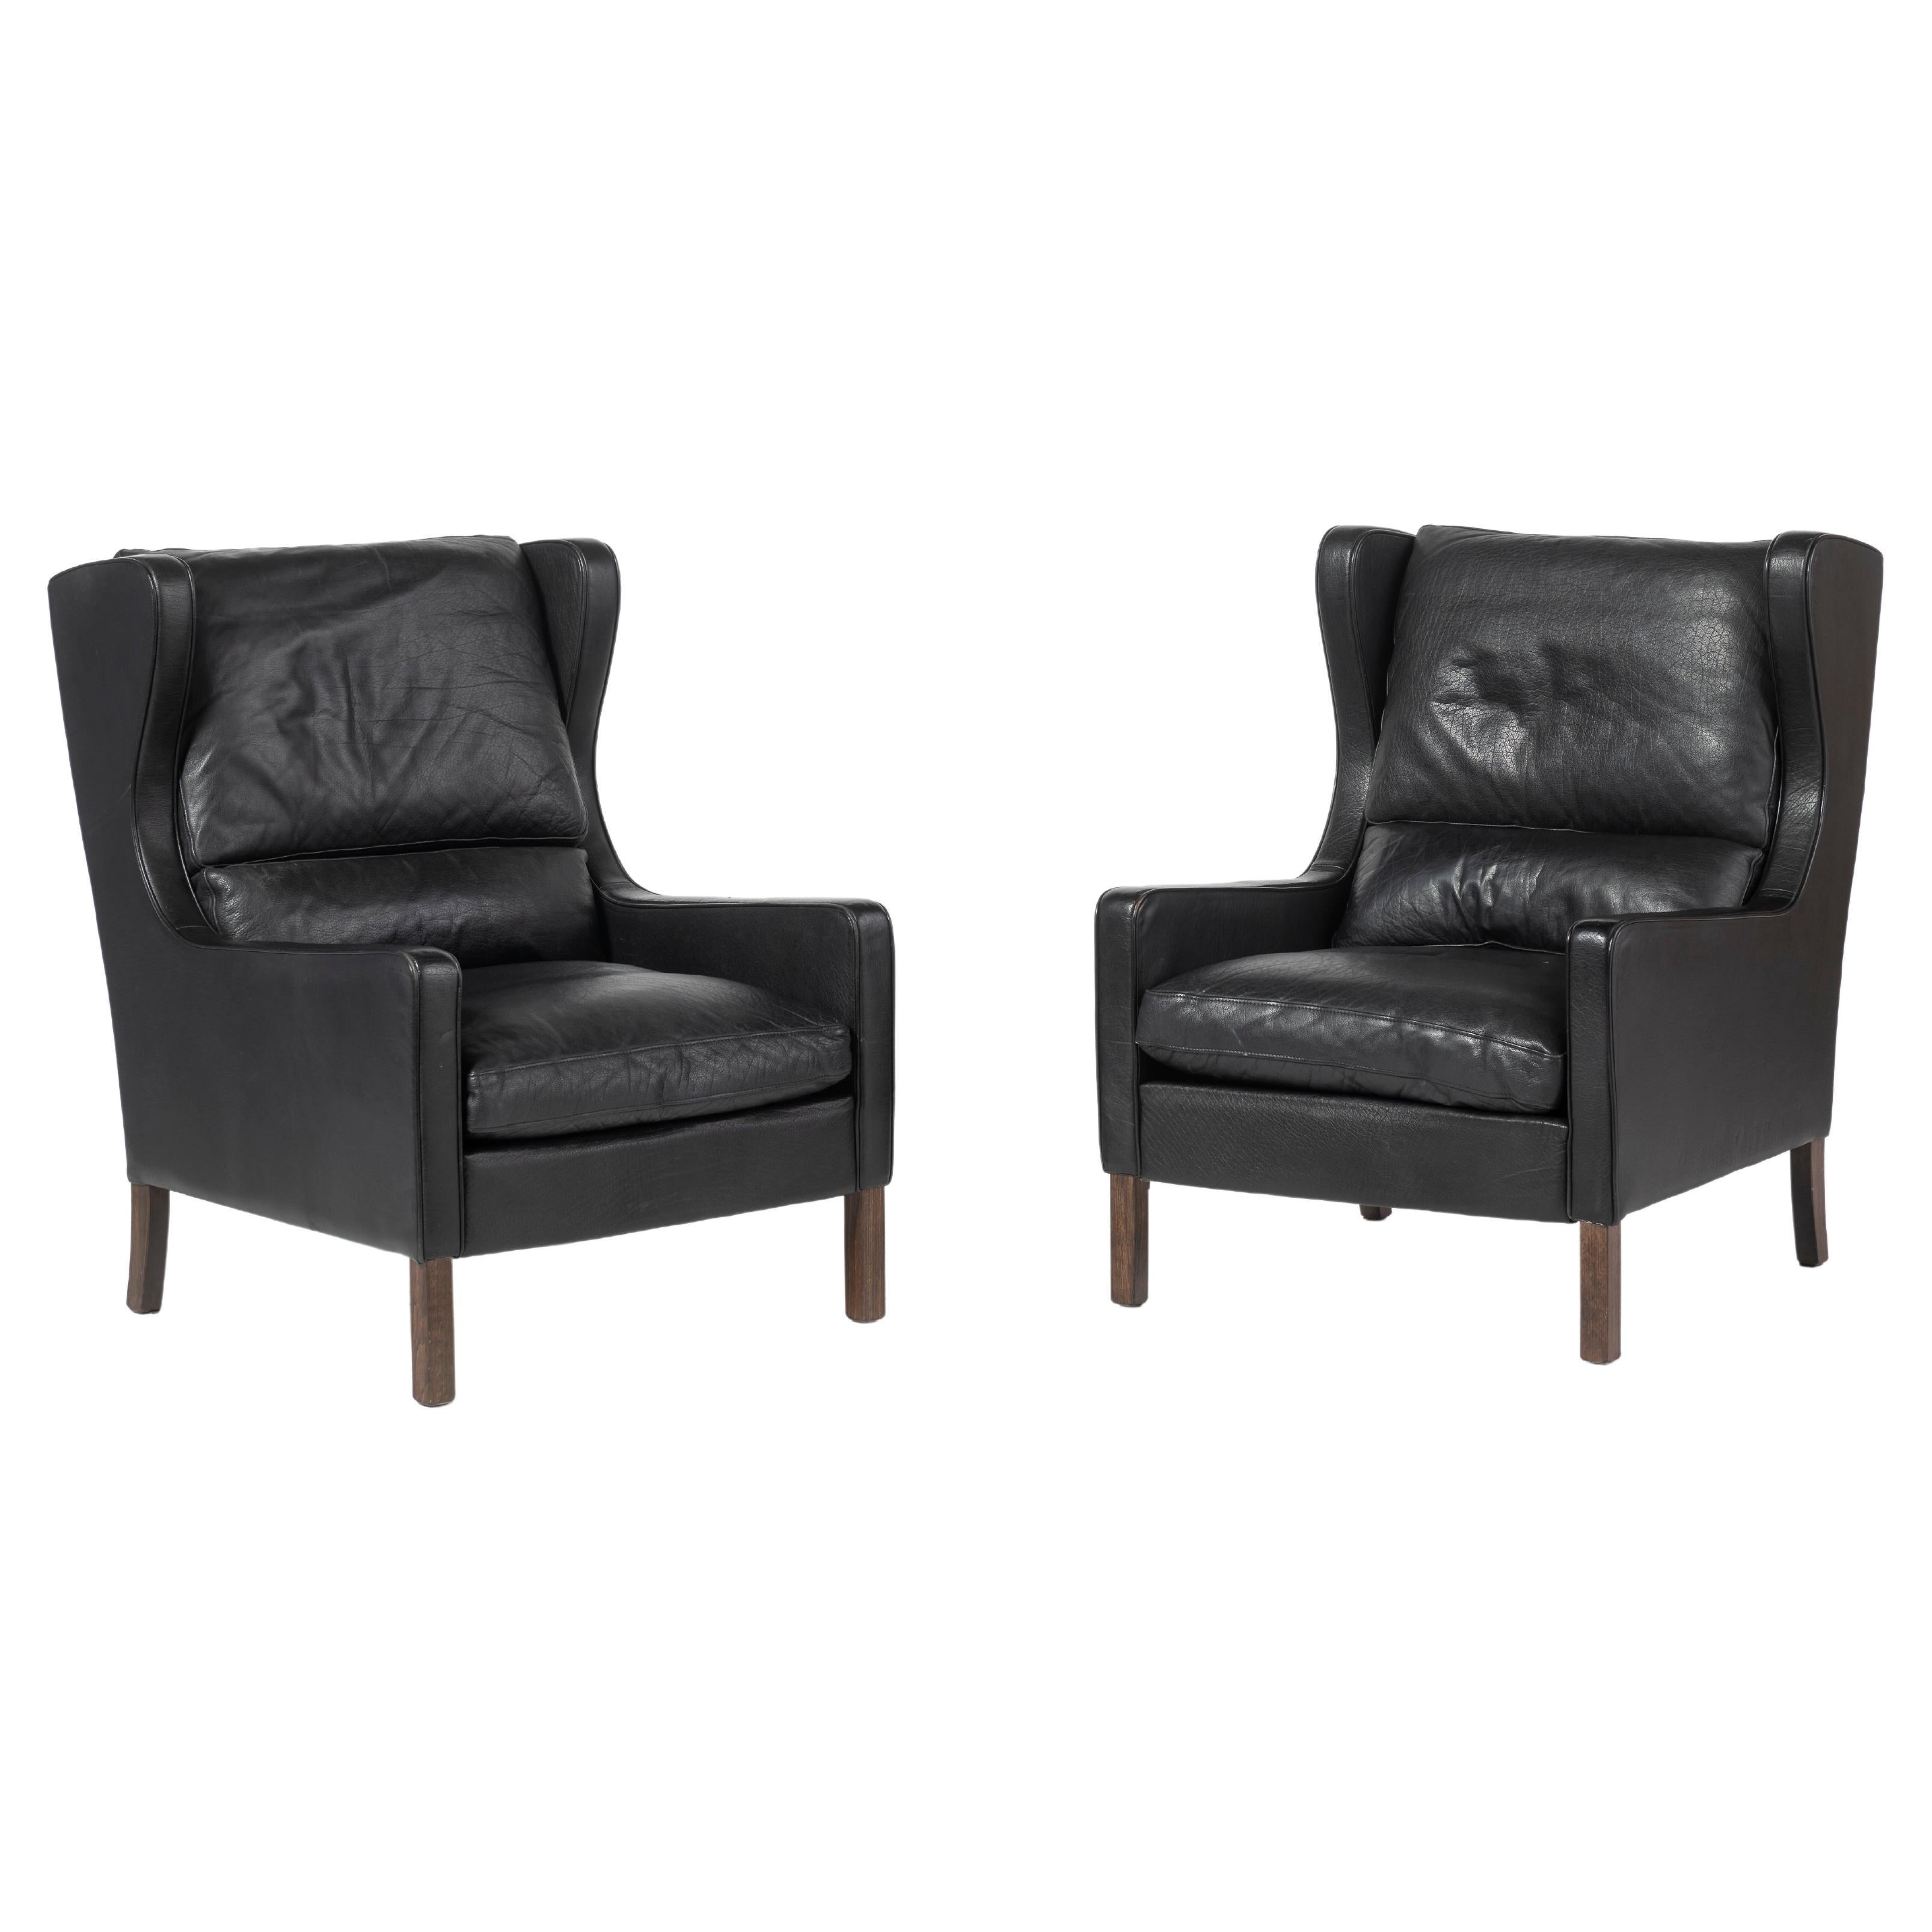 Pair of Danish Mid-Century Modern Black Leather Wingback Chairs